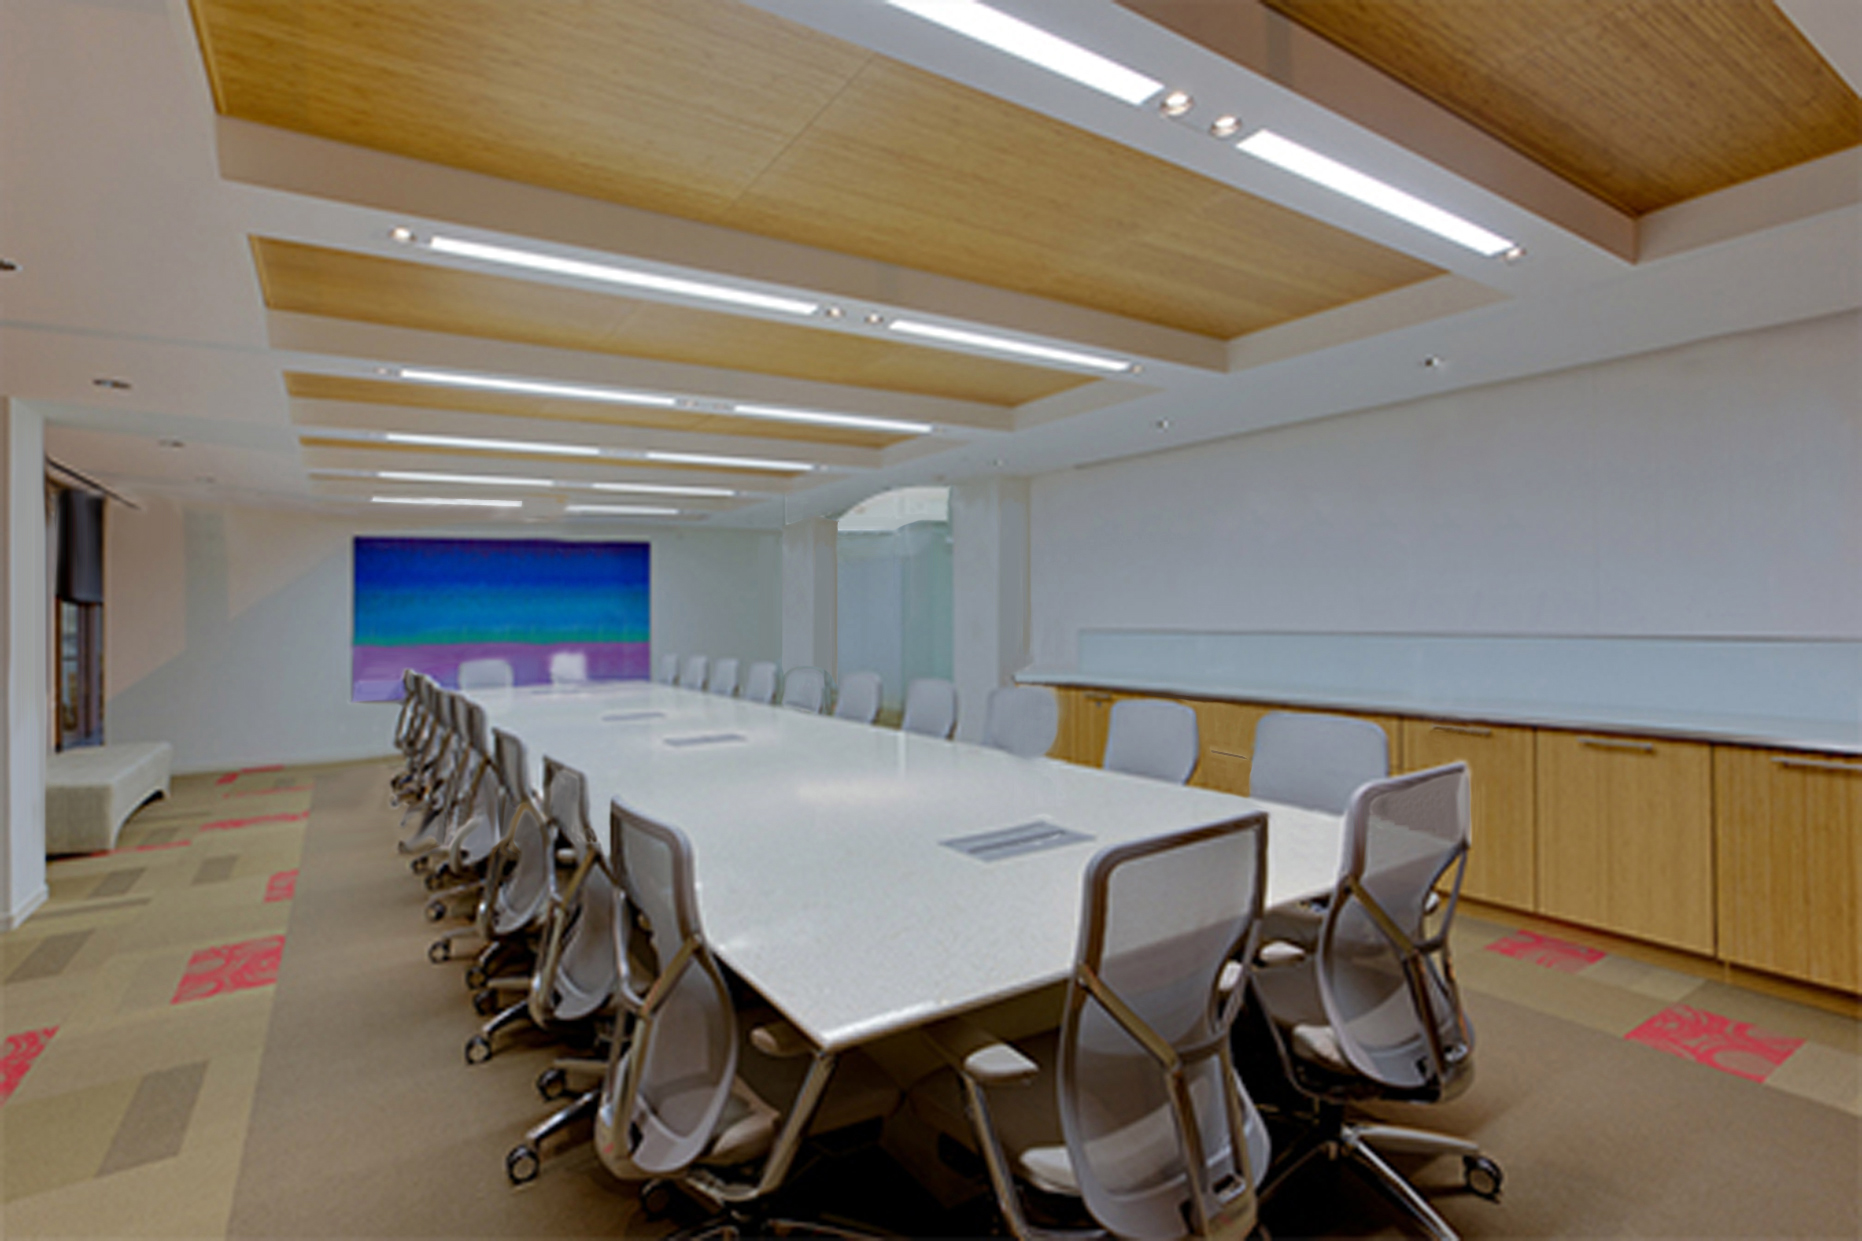 conference room with wooden ceiling panels and wooden cabinets